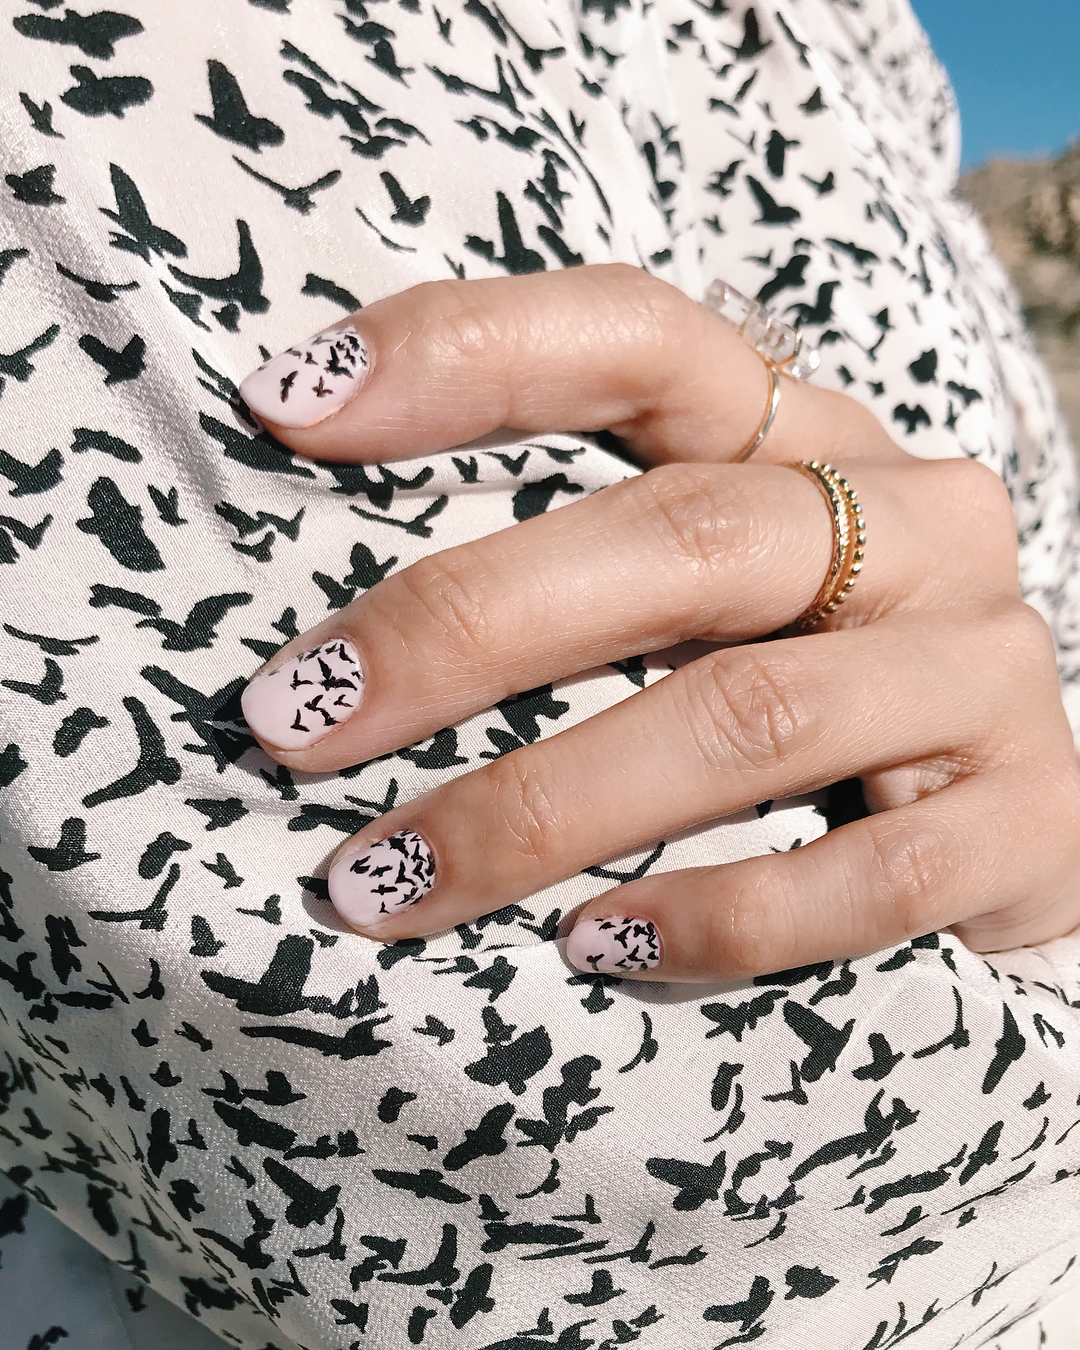 Flying birds shadow Black And White Nail Art Design